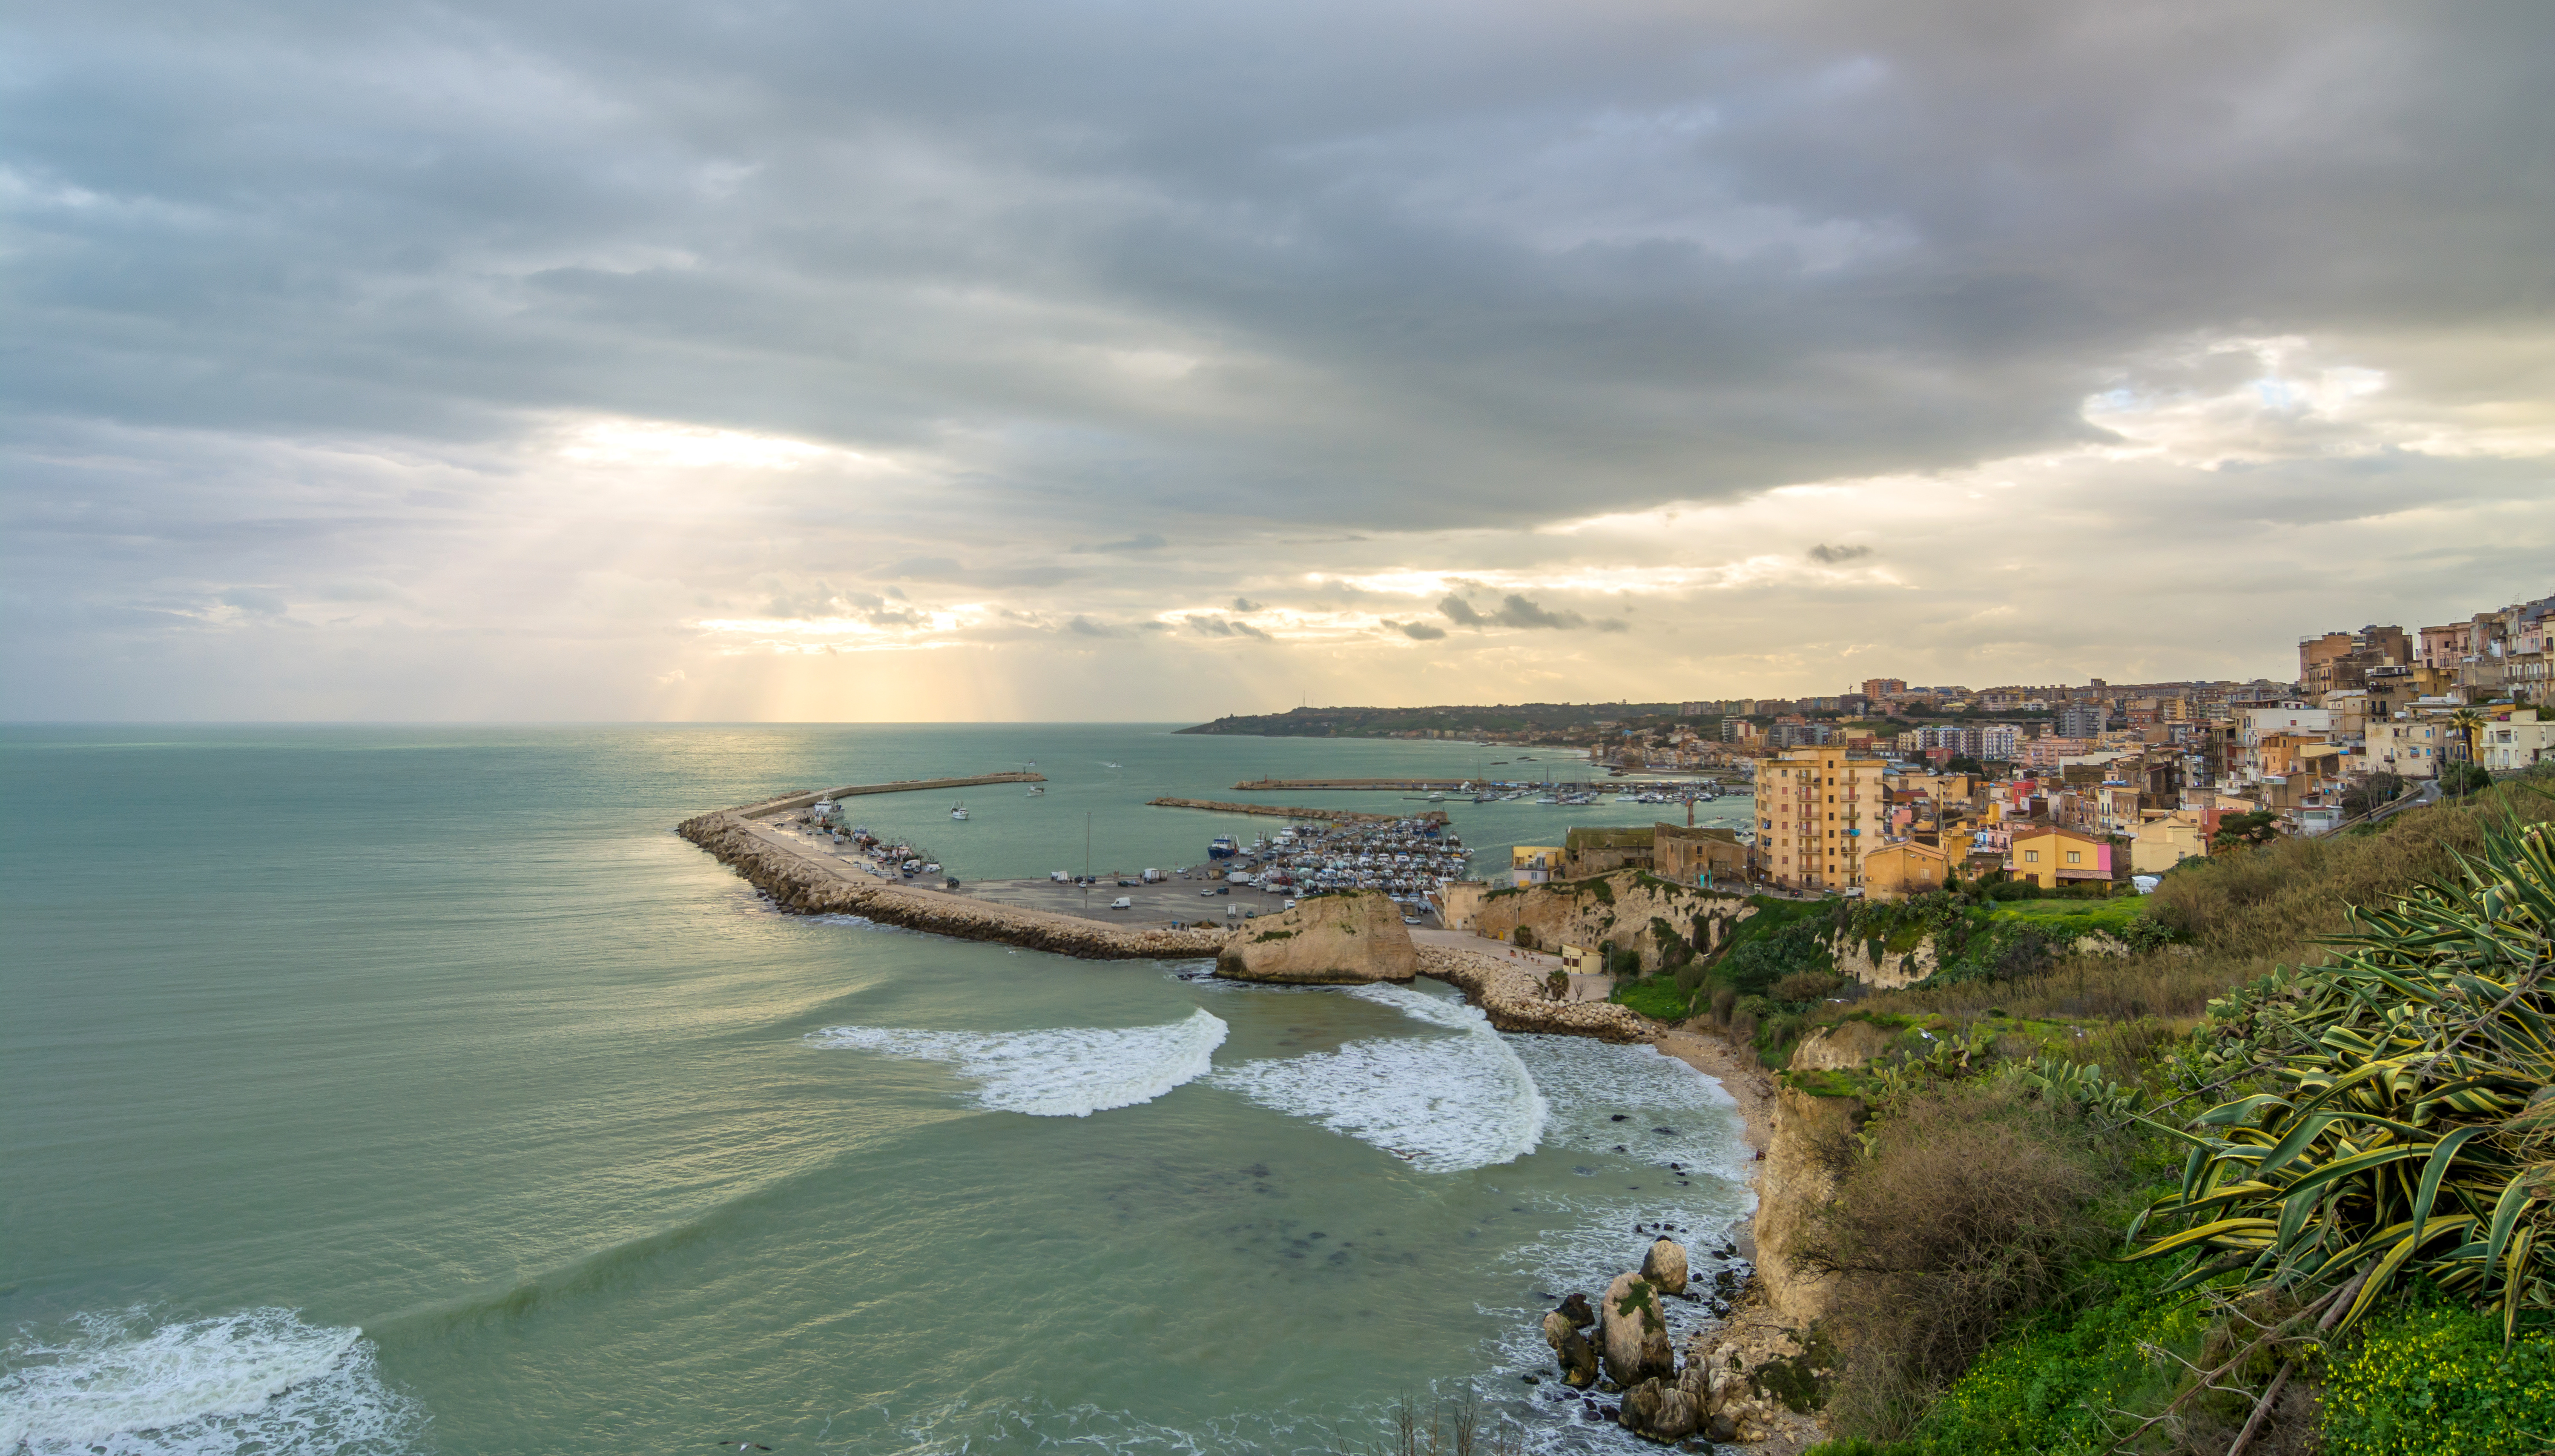 SCIACCA, ITALY - FEBRUARY 22, 2014: panoramic view of coastline with downtown in Sciacca, Italy. Sciacca is known as the city of thermal baths since Greek domination in the 3rd and 4th centuries BC (Licensed stock photo from Adobe Stock)